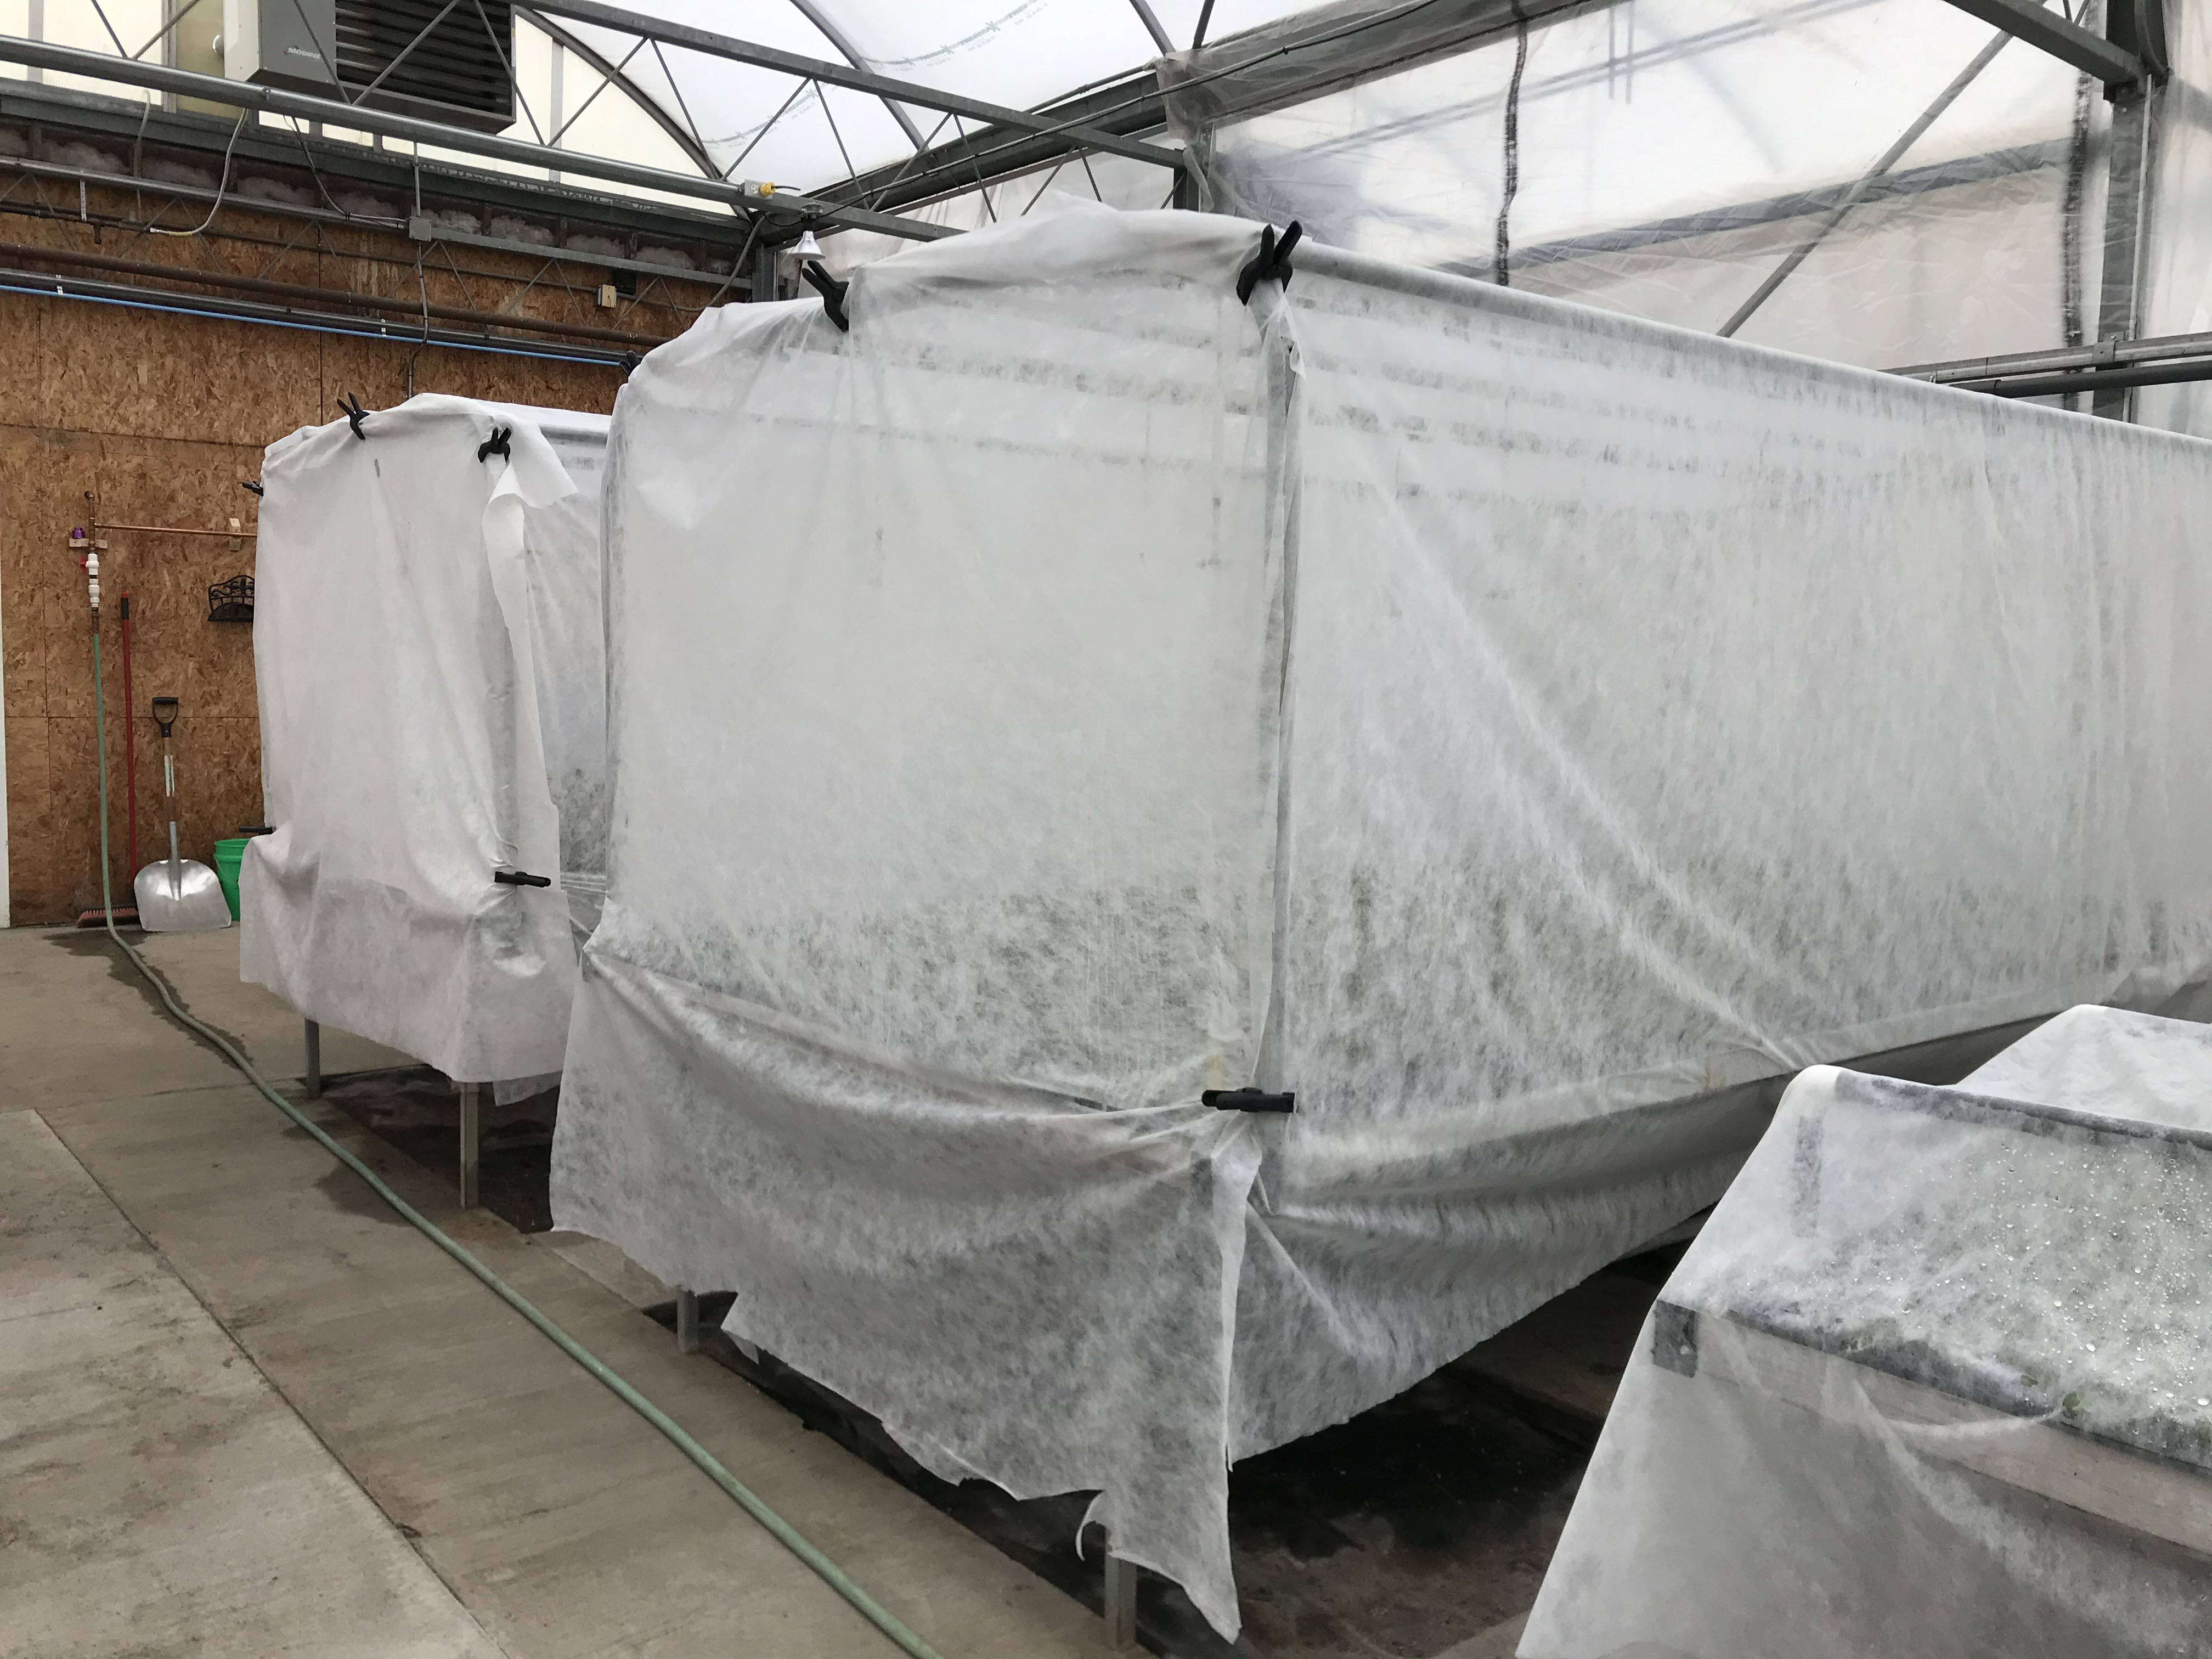 Fabric tent covering crops in a greenhouse